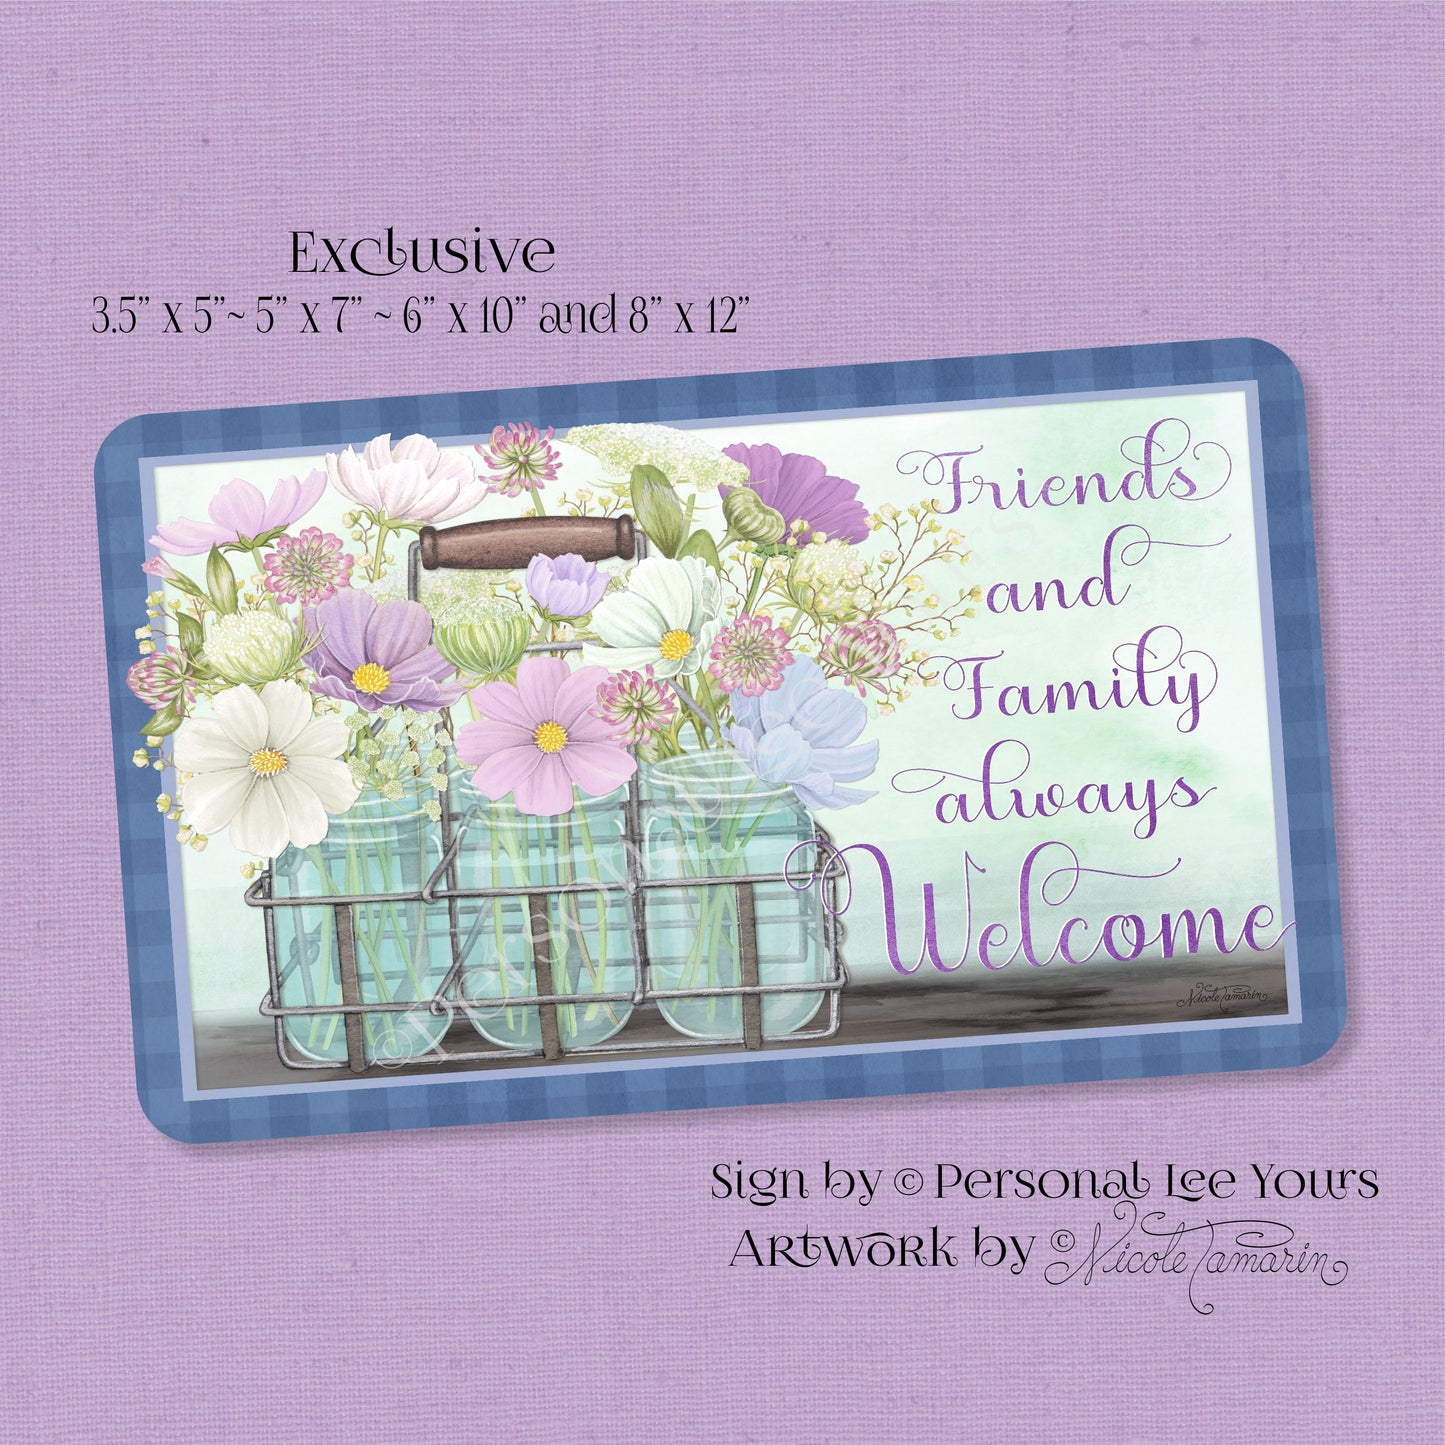 Nicole Tamarin Exclusive Sign * Pretty Little Welcome * Horizontal * 4 Sizes * Lightweight Metal